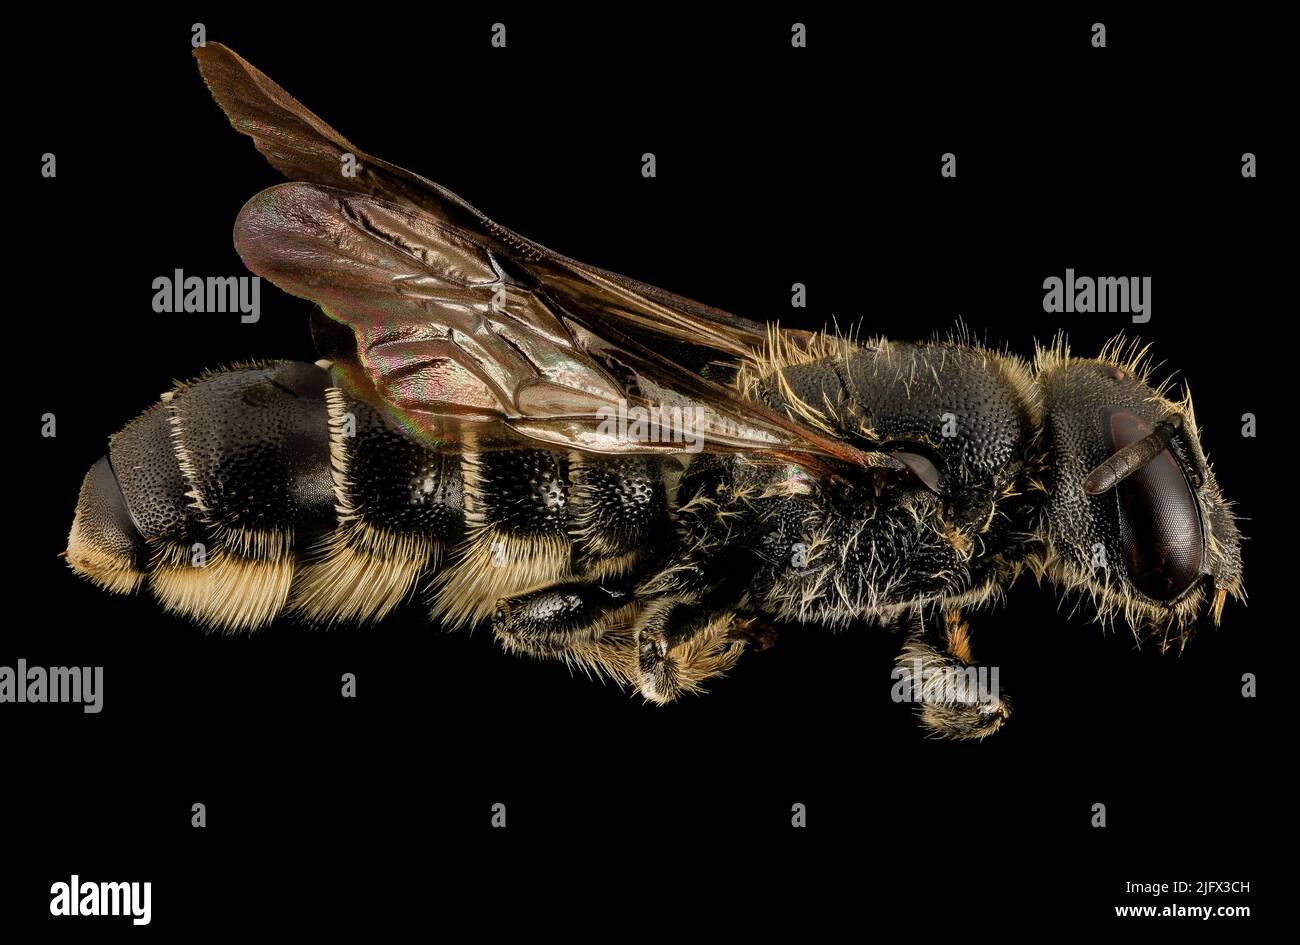 Chelostoma rapunculi. A new species for Vermont, found in Middlesex, this invasive bee is a specialist on Campanula flowers. Chelostoma rapunculi is a species of bee in the family Megachilidae. It is found in Europe and Northern Asia (excluding China) and North America. Image credit: USGS Stock Photo